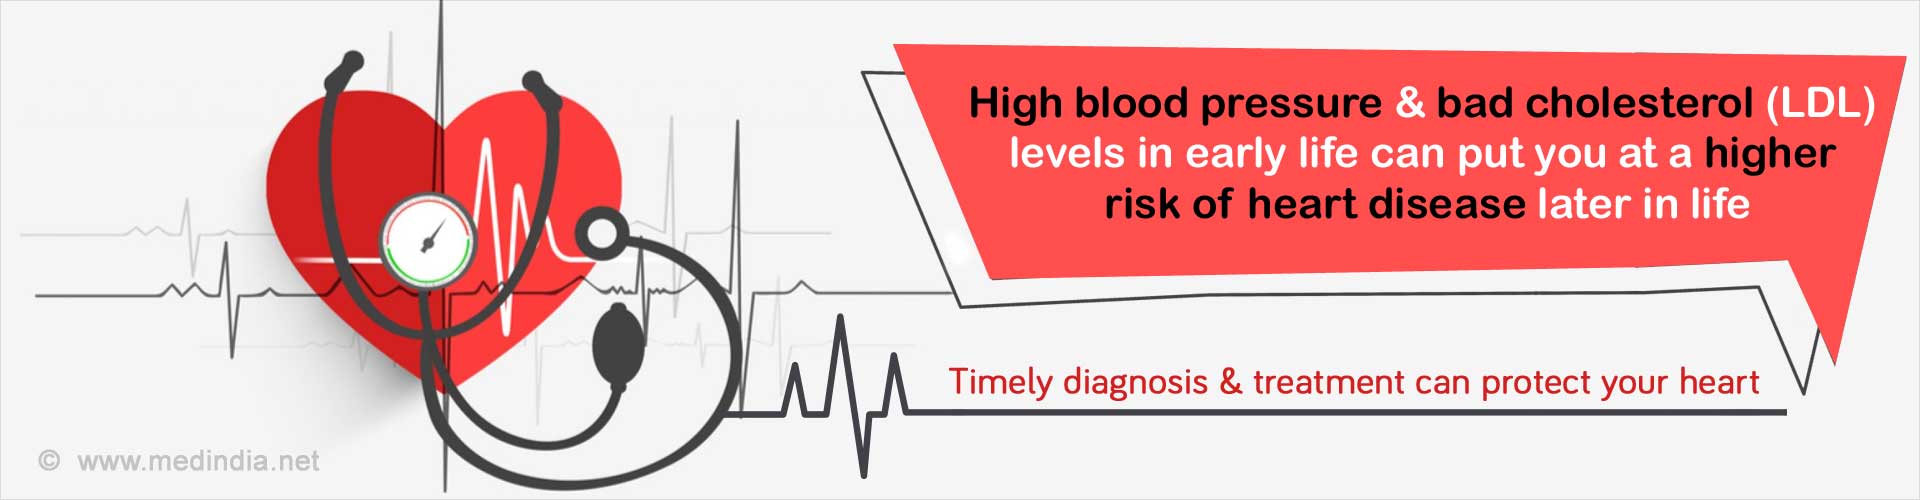 High blood pressure and bad cholesterol (LDL) levels in early life can put you at a higher risk of heart disease risk later in life. Timely diagnosis and treatment can protect your heart.